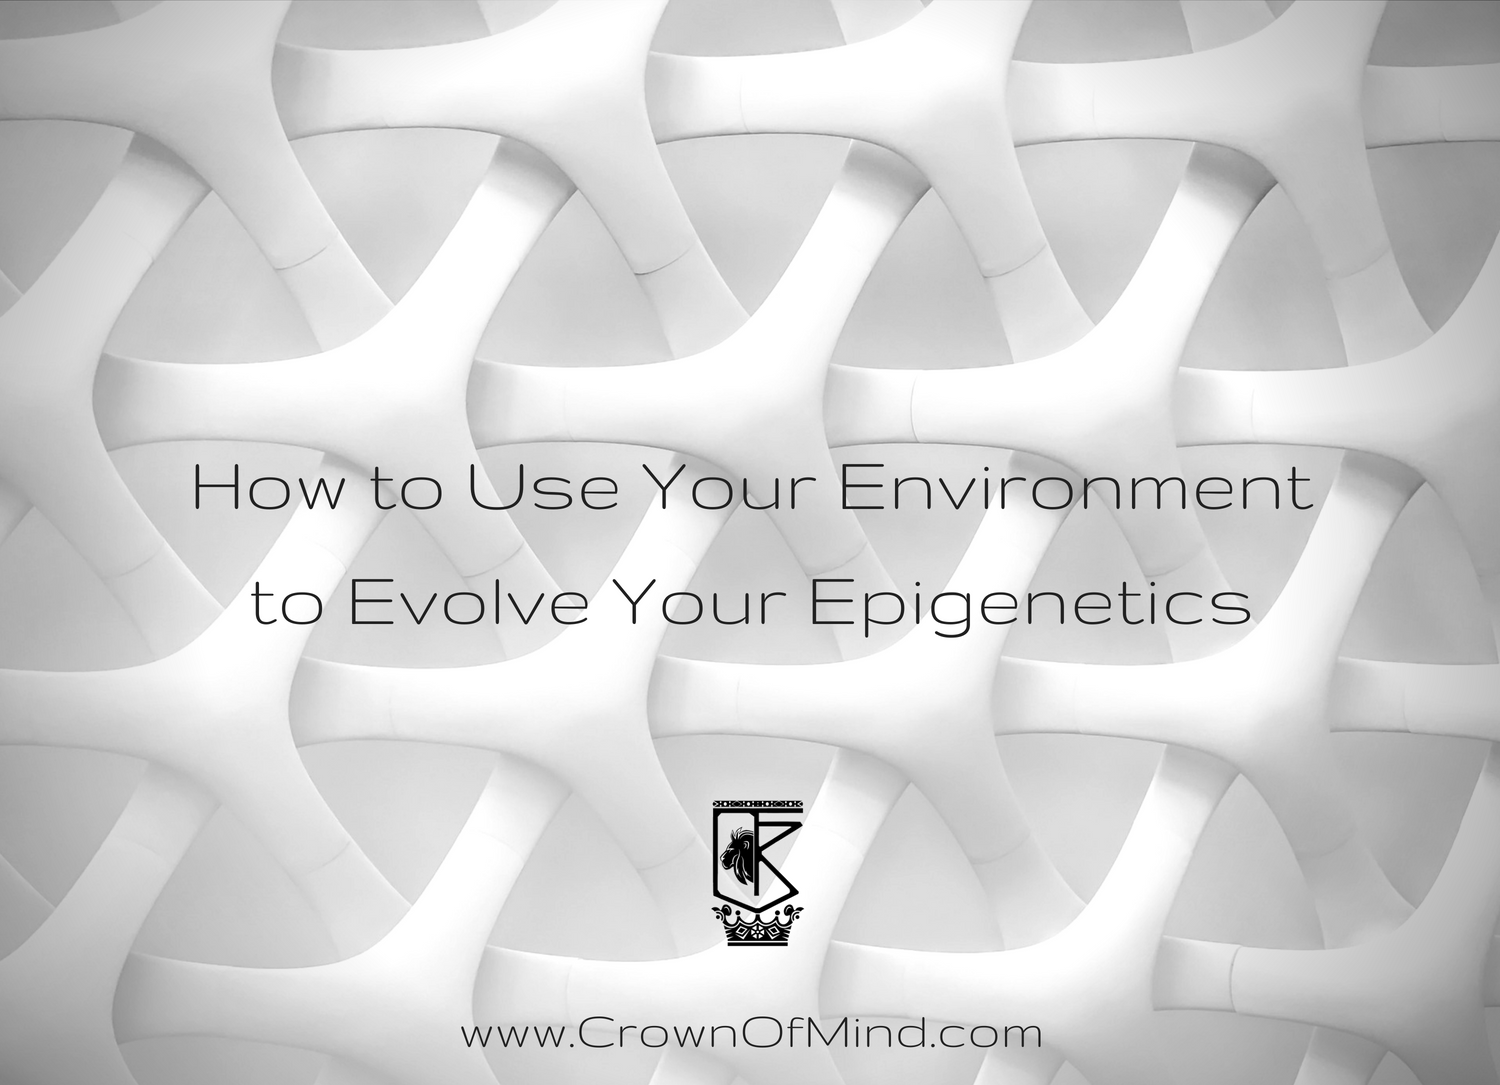 How to Use Your Environment to Evolve Your Epigenetics